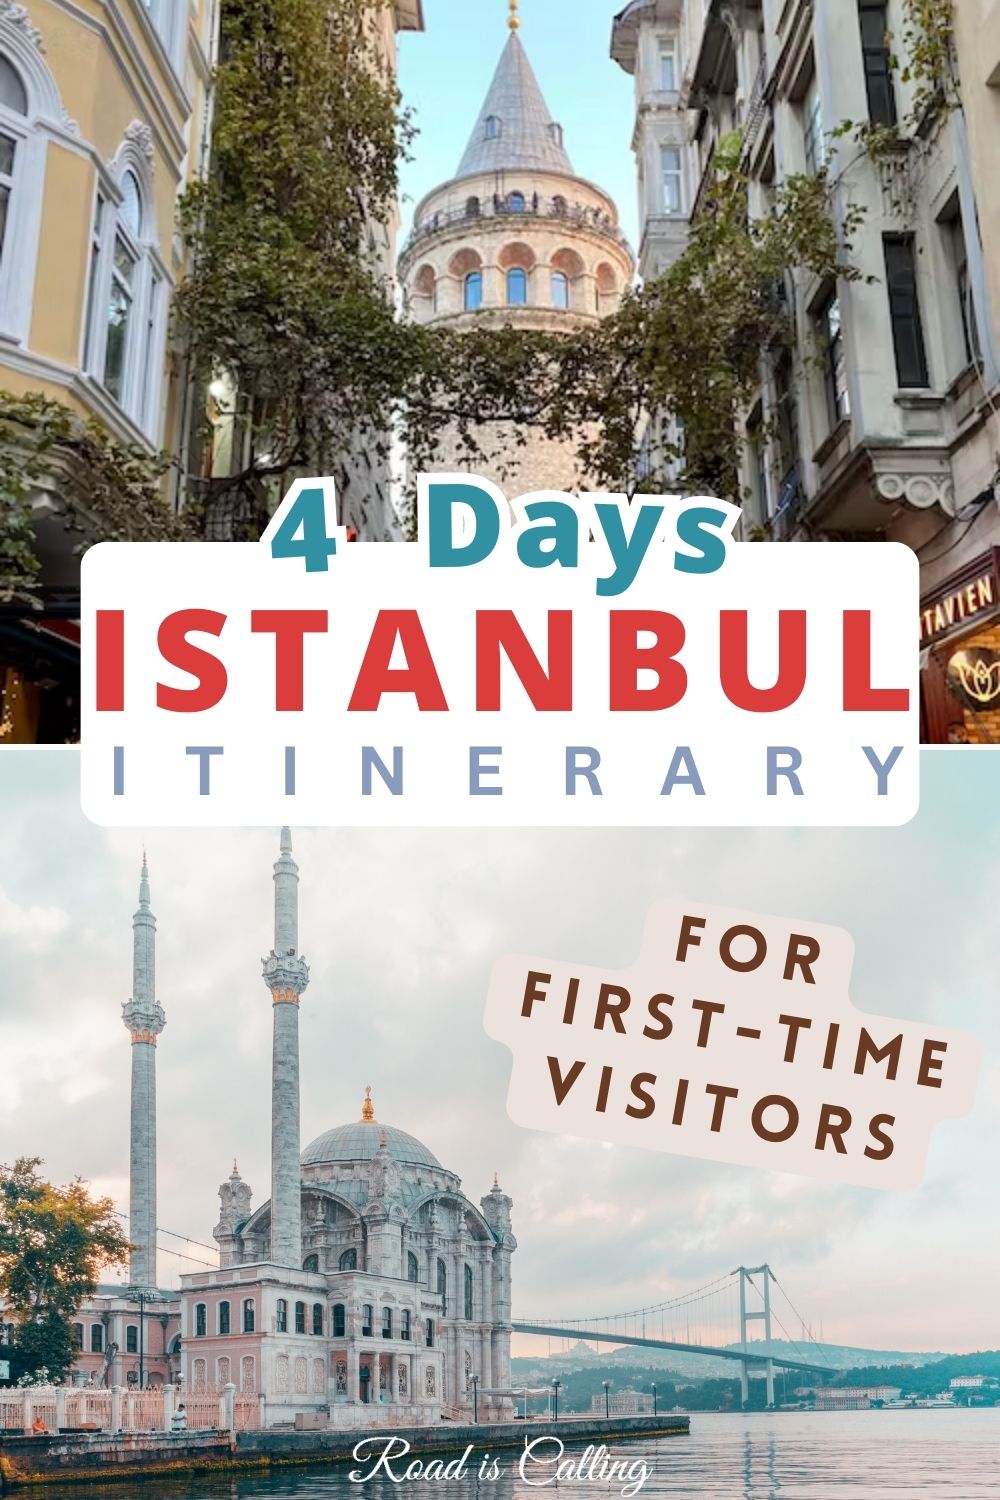 Istanbul in 4 days itinerary